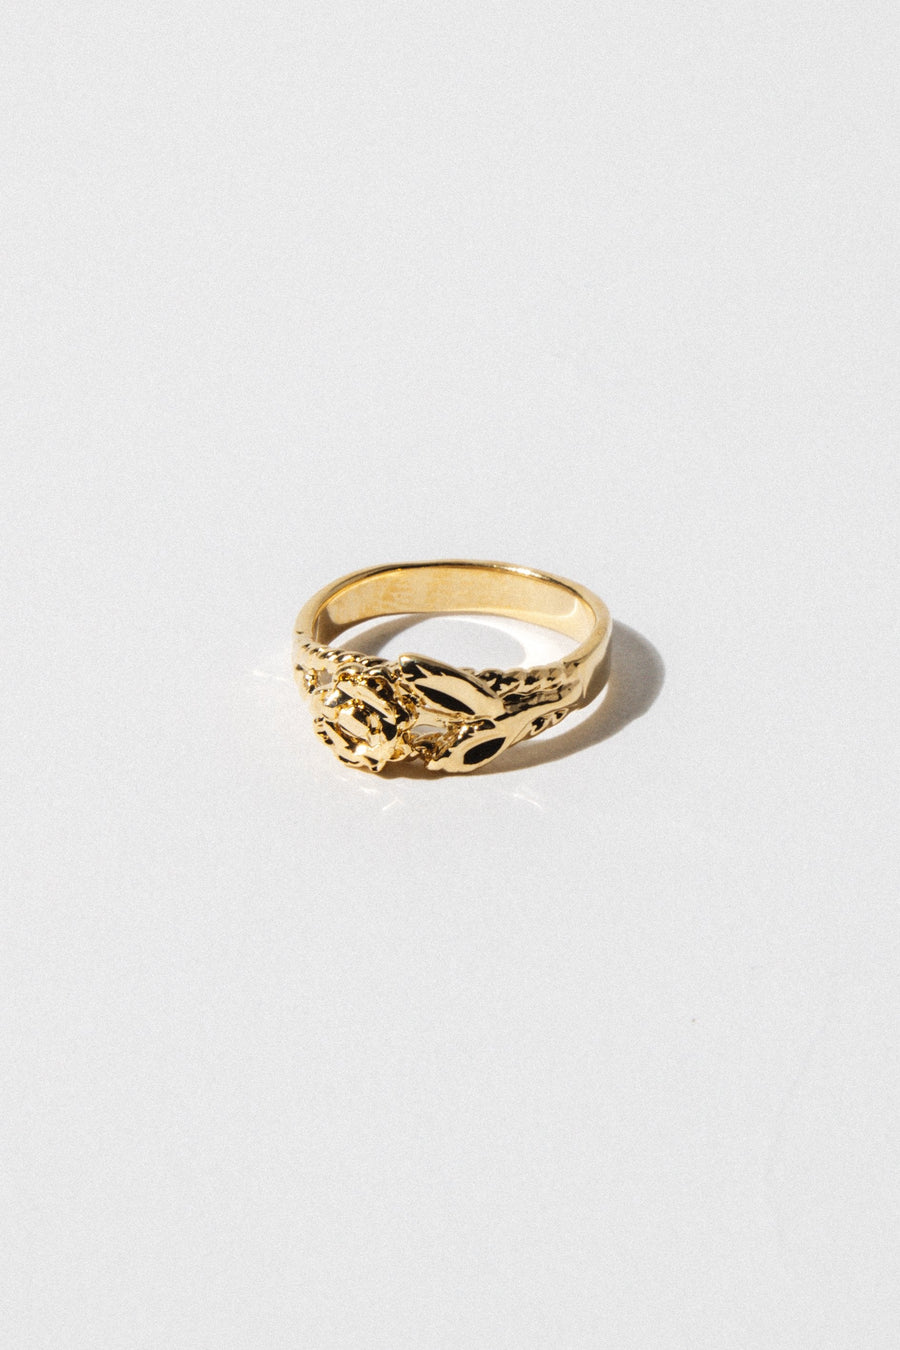 Sparrow Jewelry US 4 / Gold Eden Ring